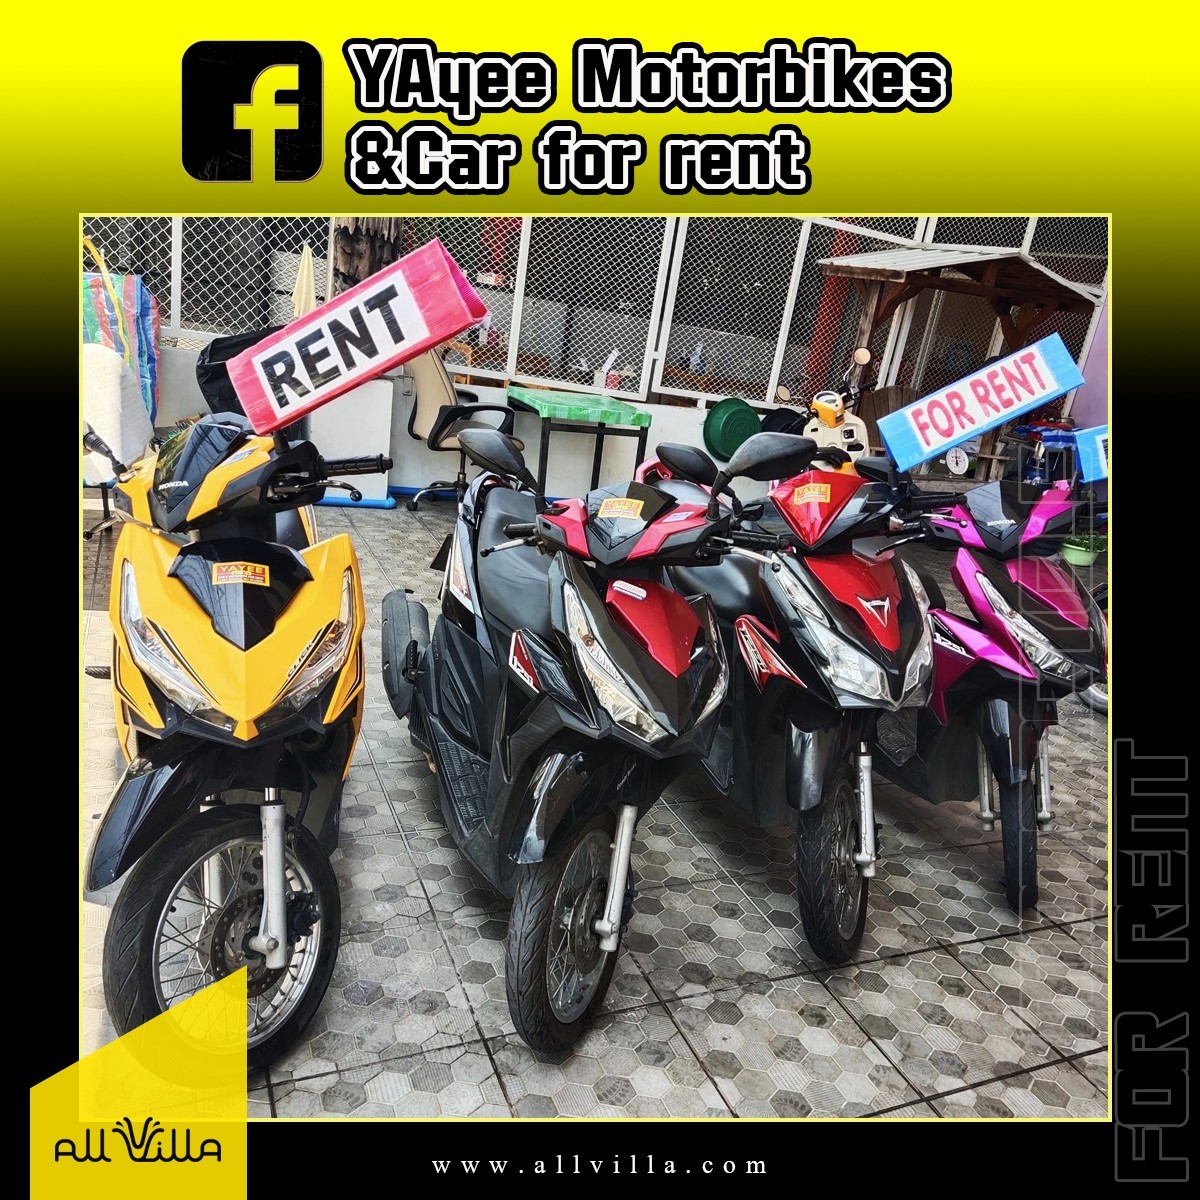 Motorbike & Car For Rent by YAYEE